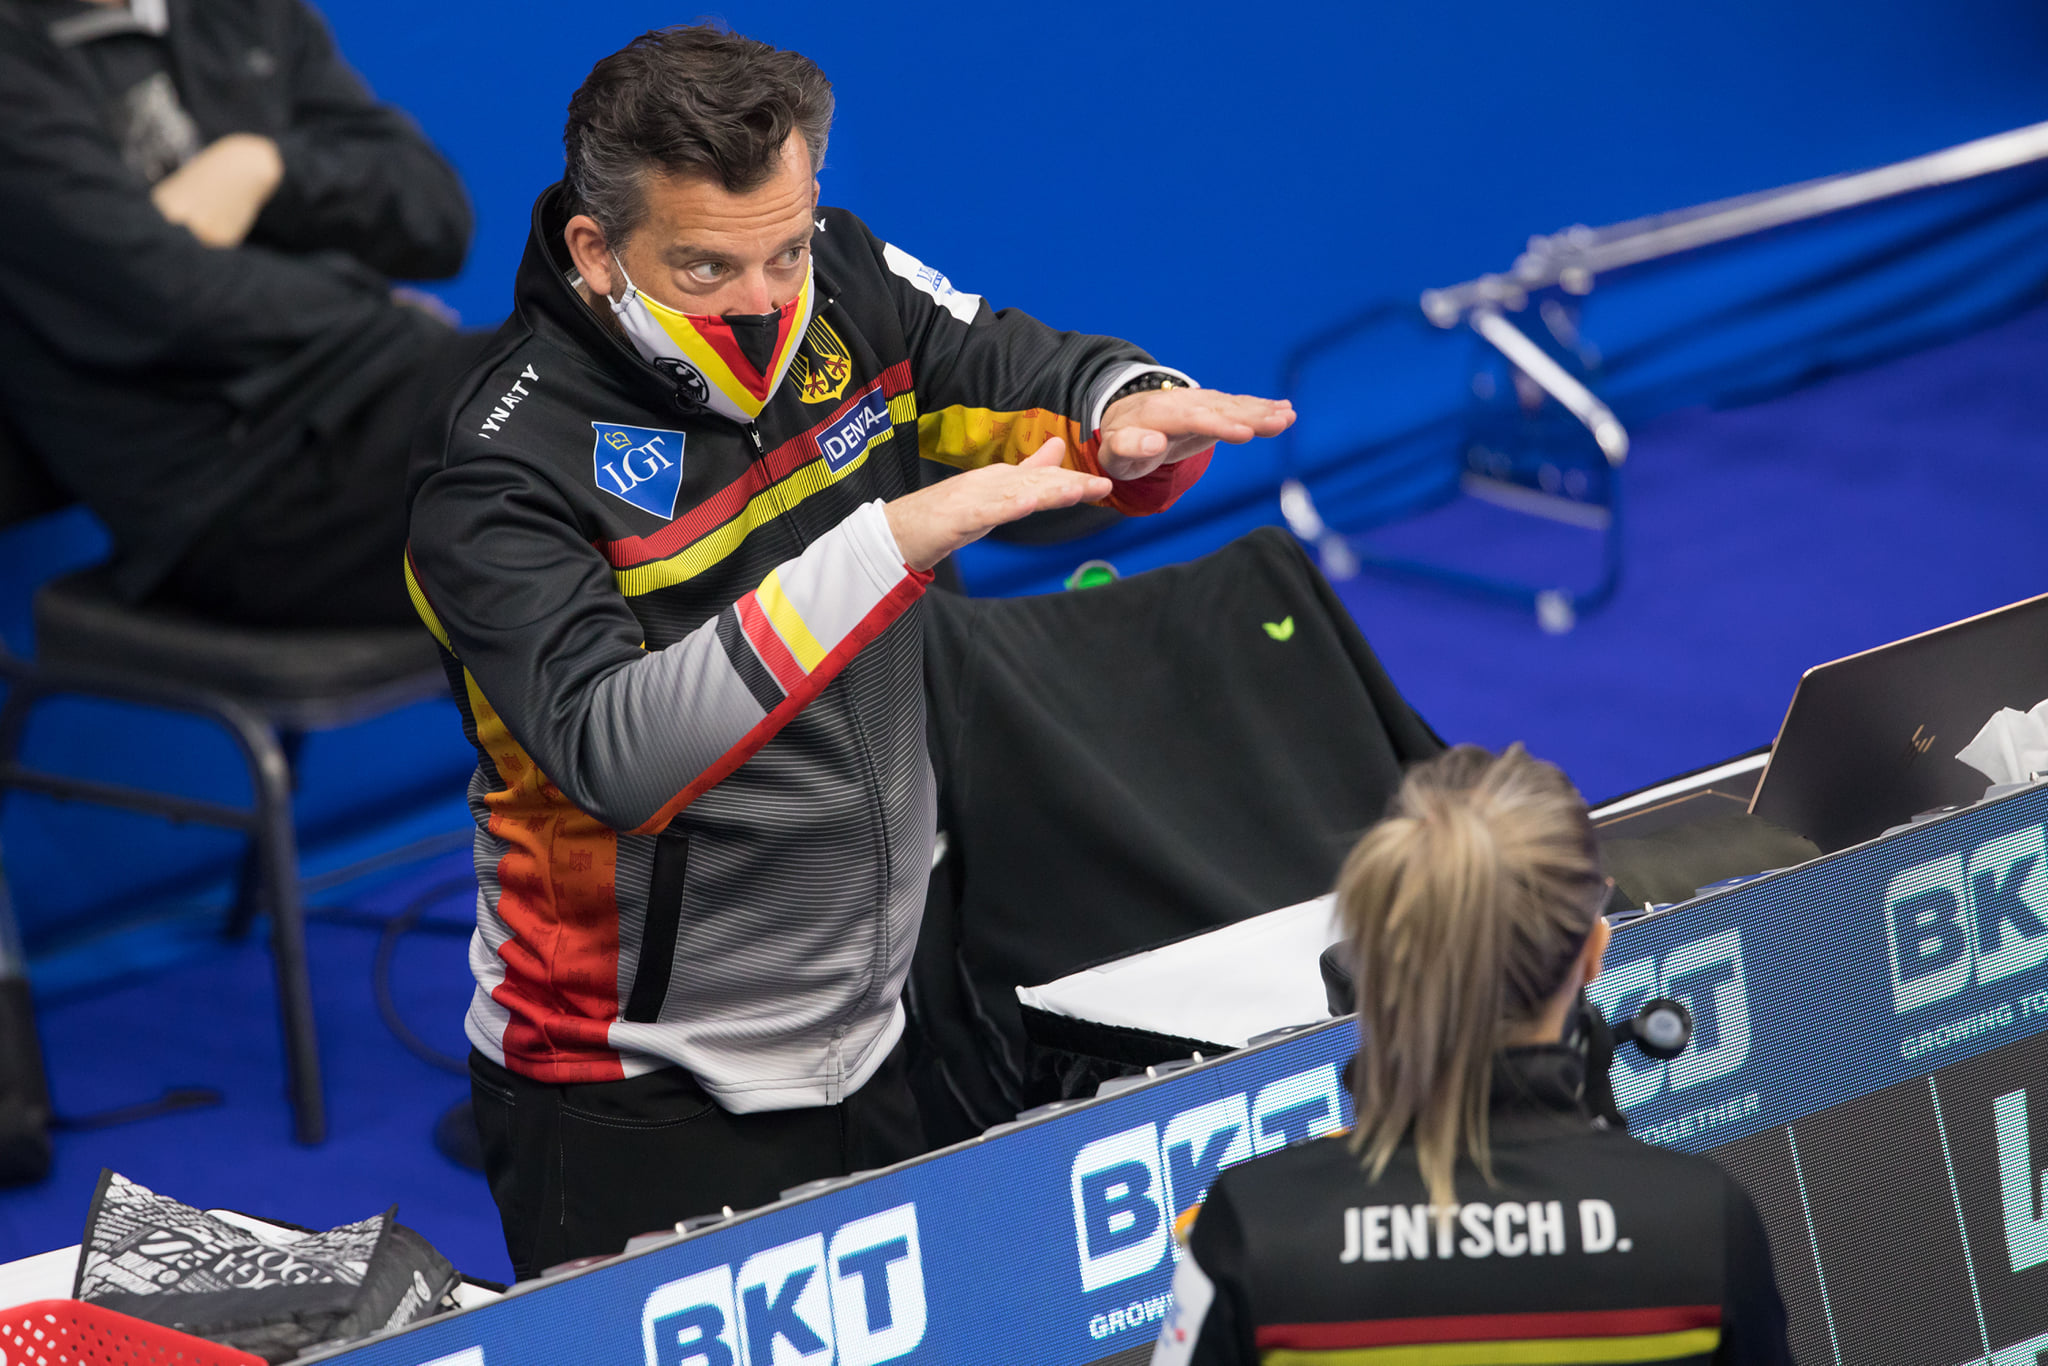 Germany are competing with three players at the Women's World Curling Championships ©WCF/Steve Seixeiro